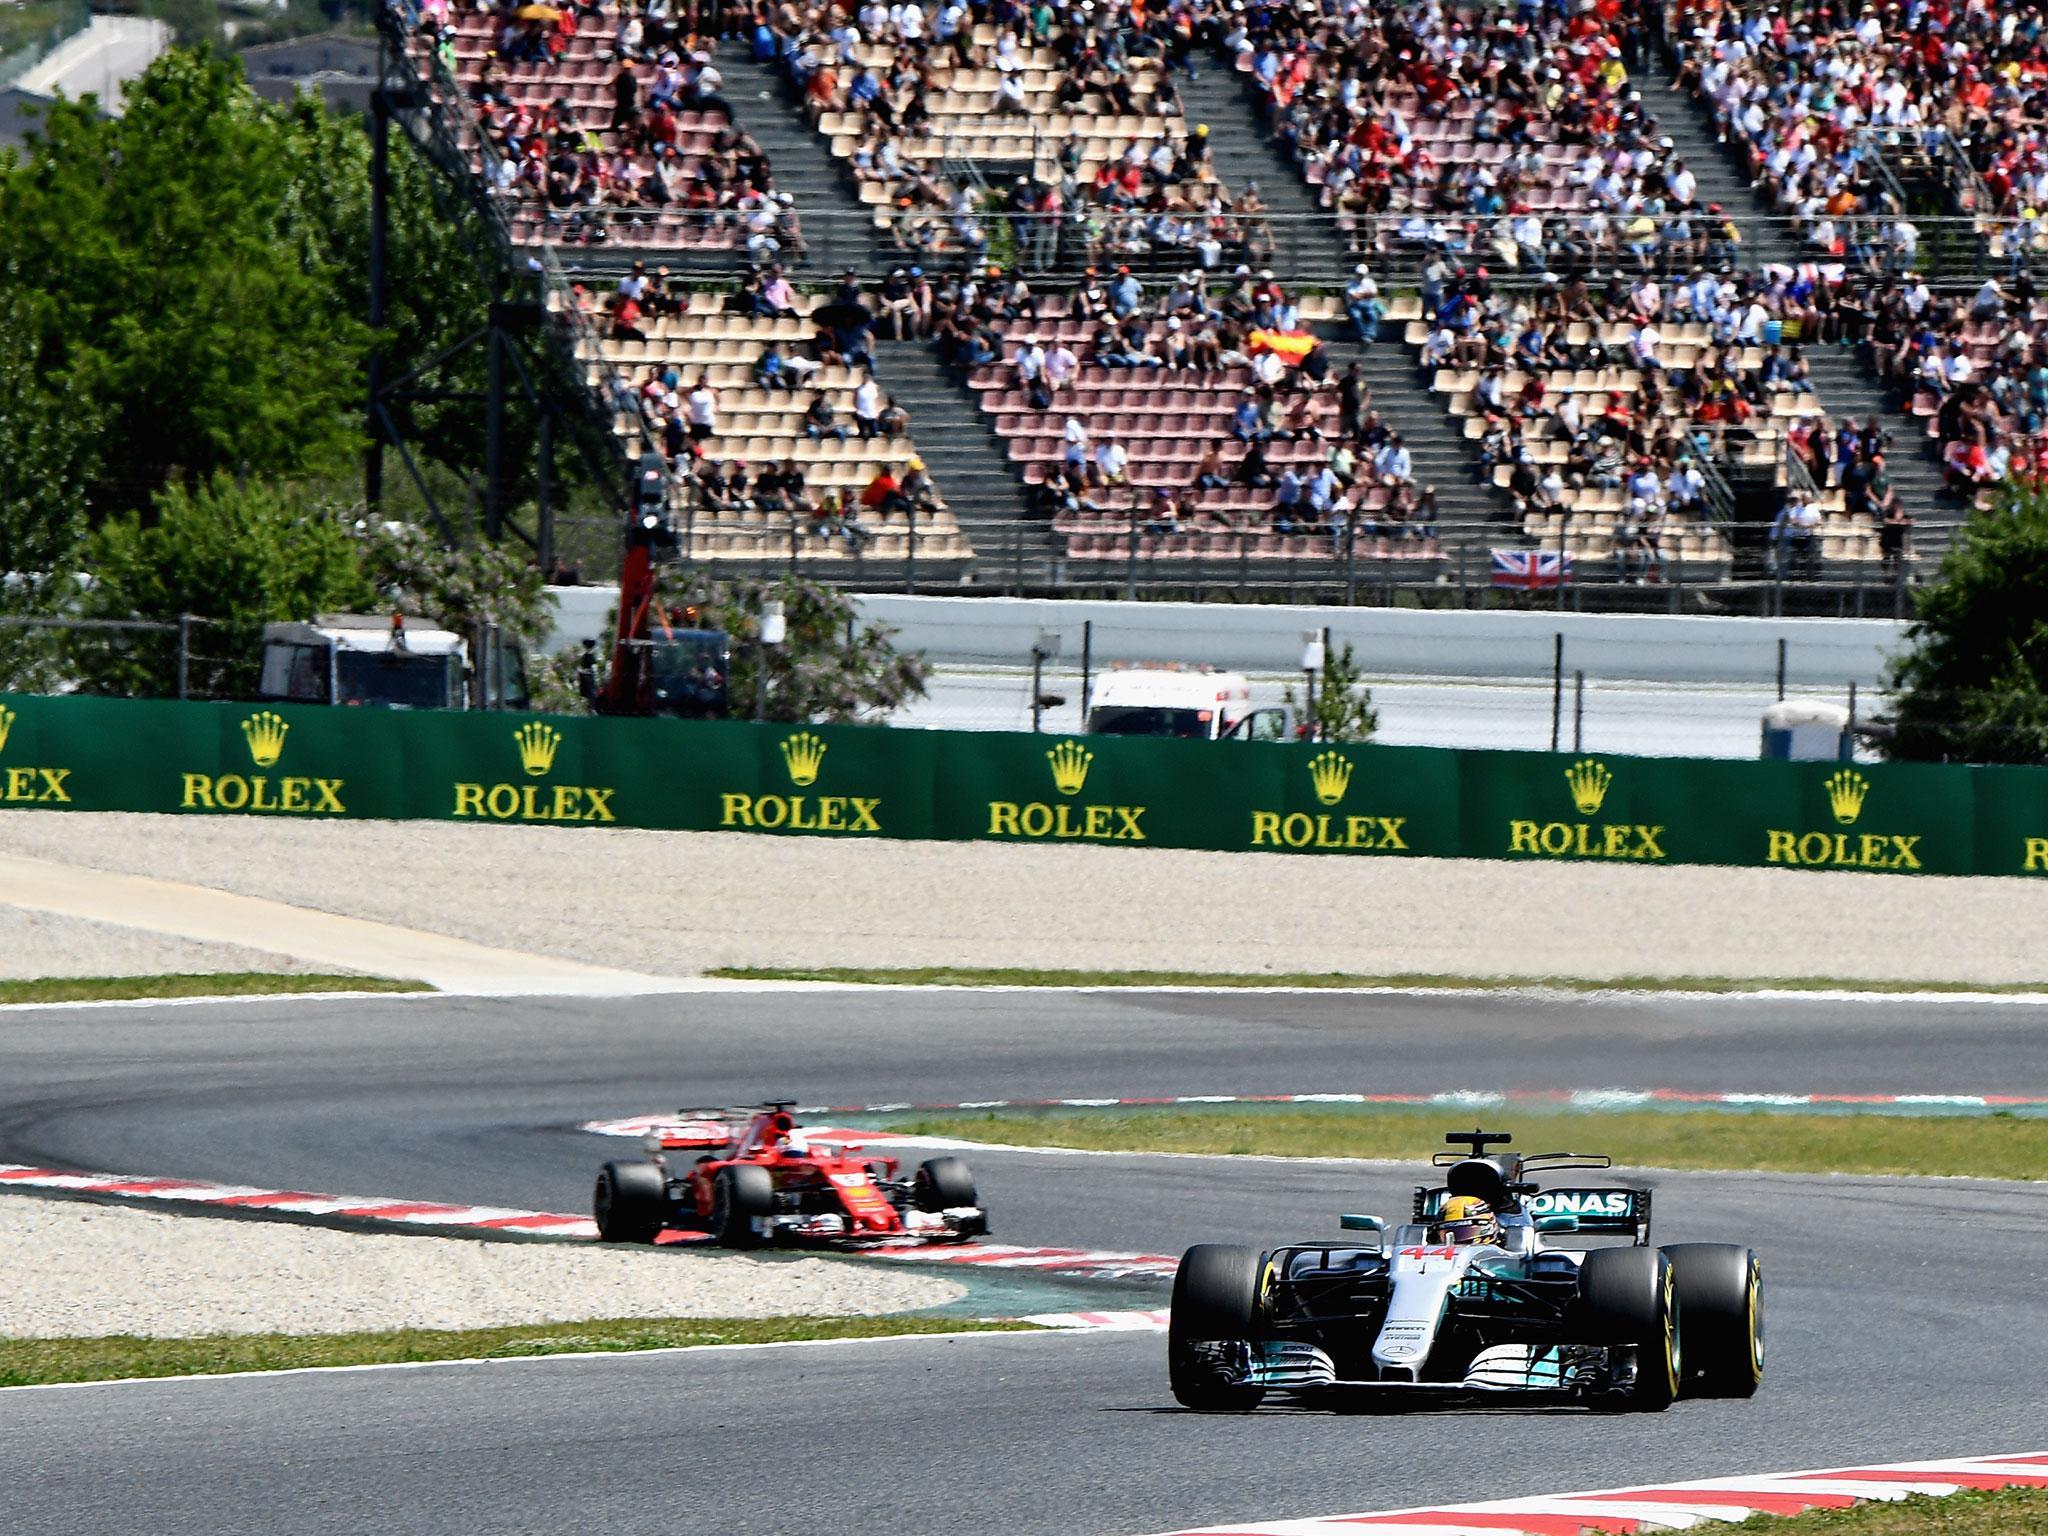 The British driver overtook Vettel with more than 20 laps left